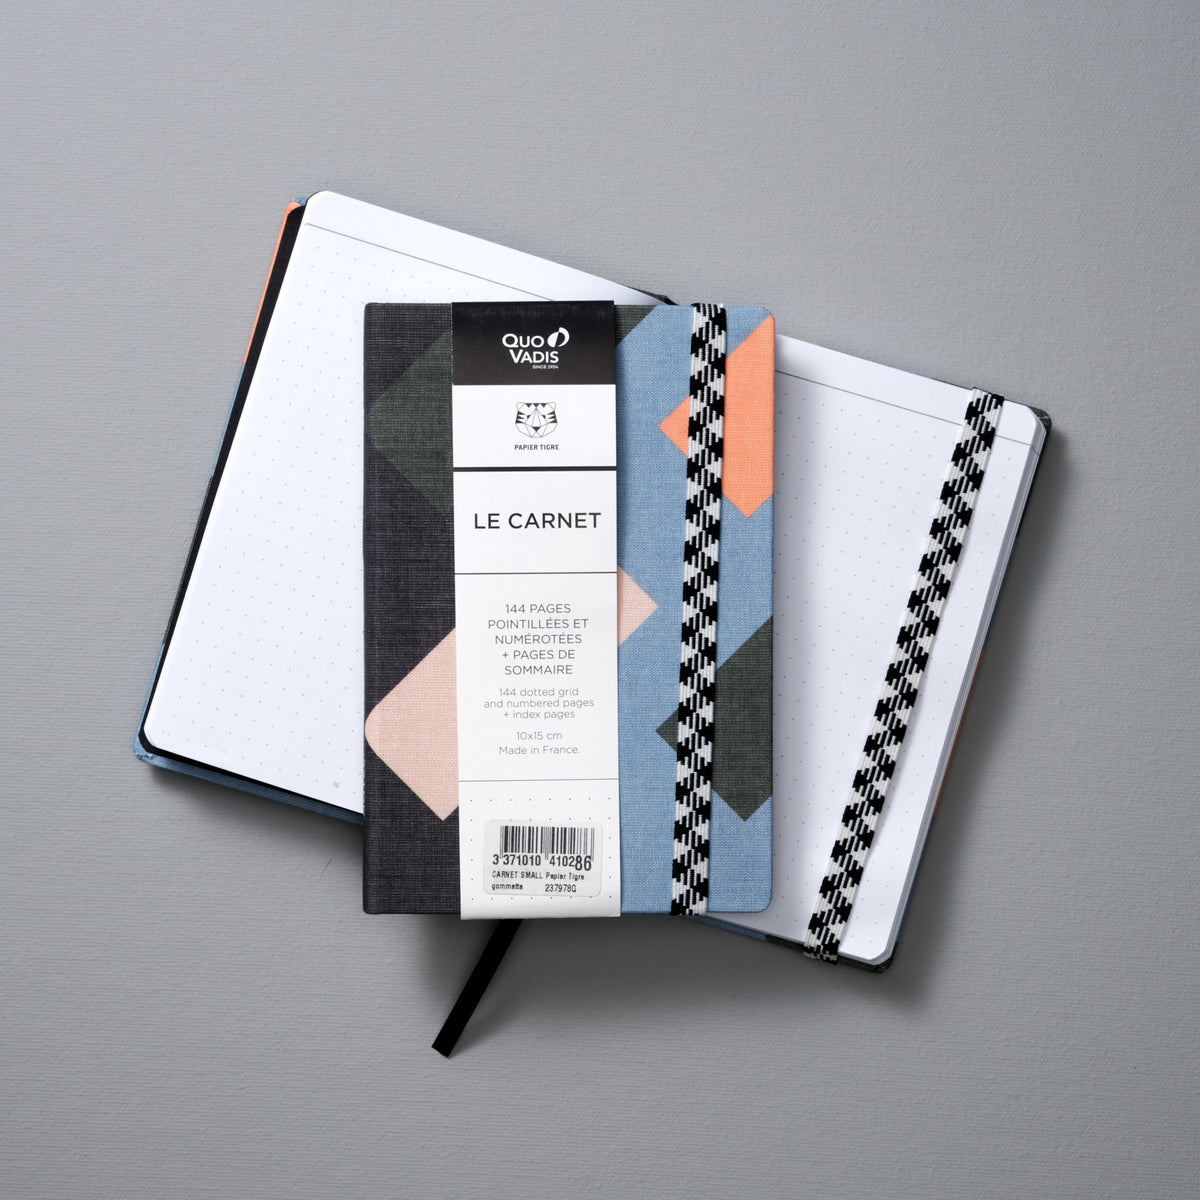 An A6 Canvas Notebook - Dot Grid from Papier Tigre with a checkered pattern on it.